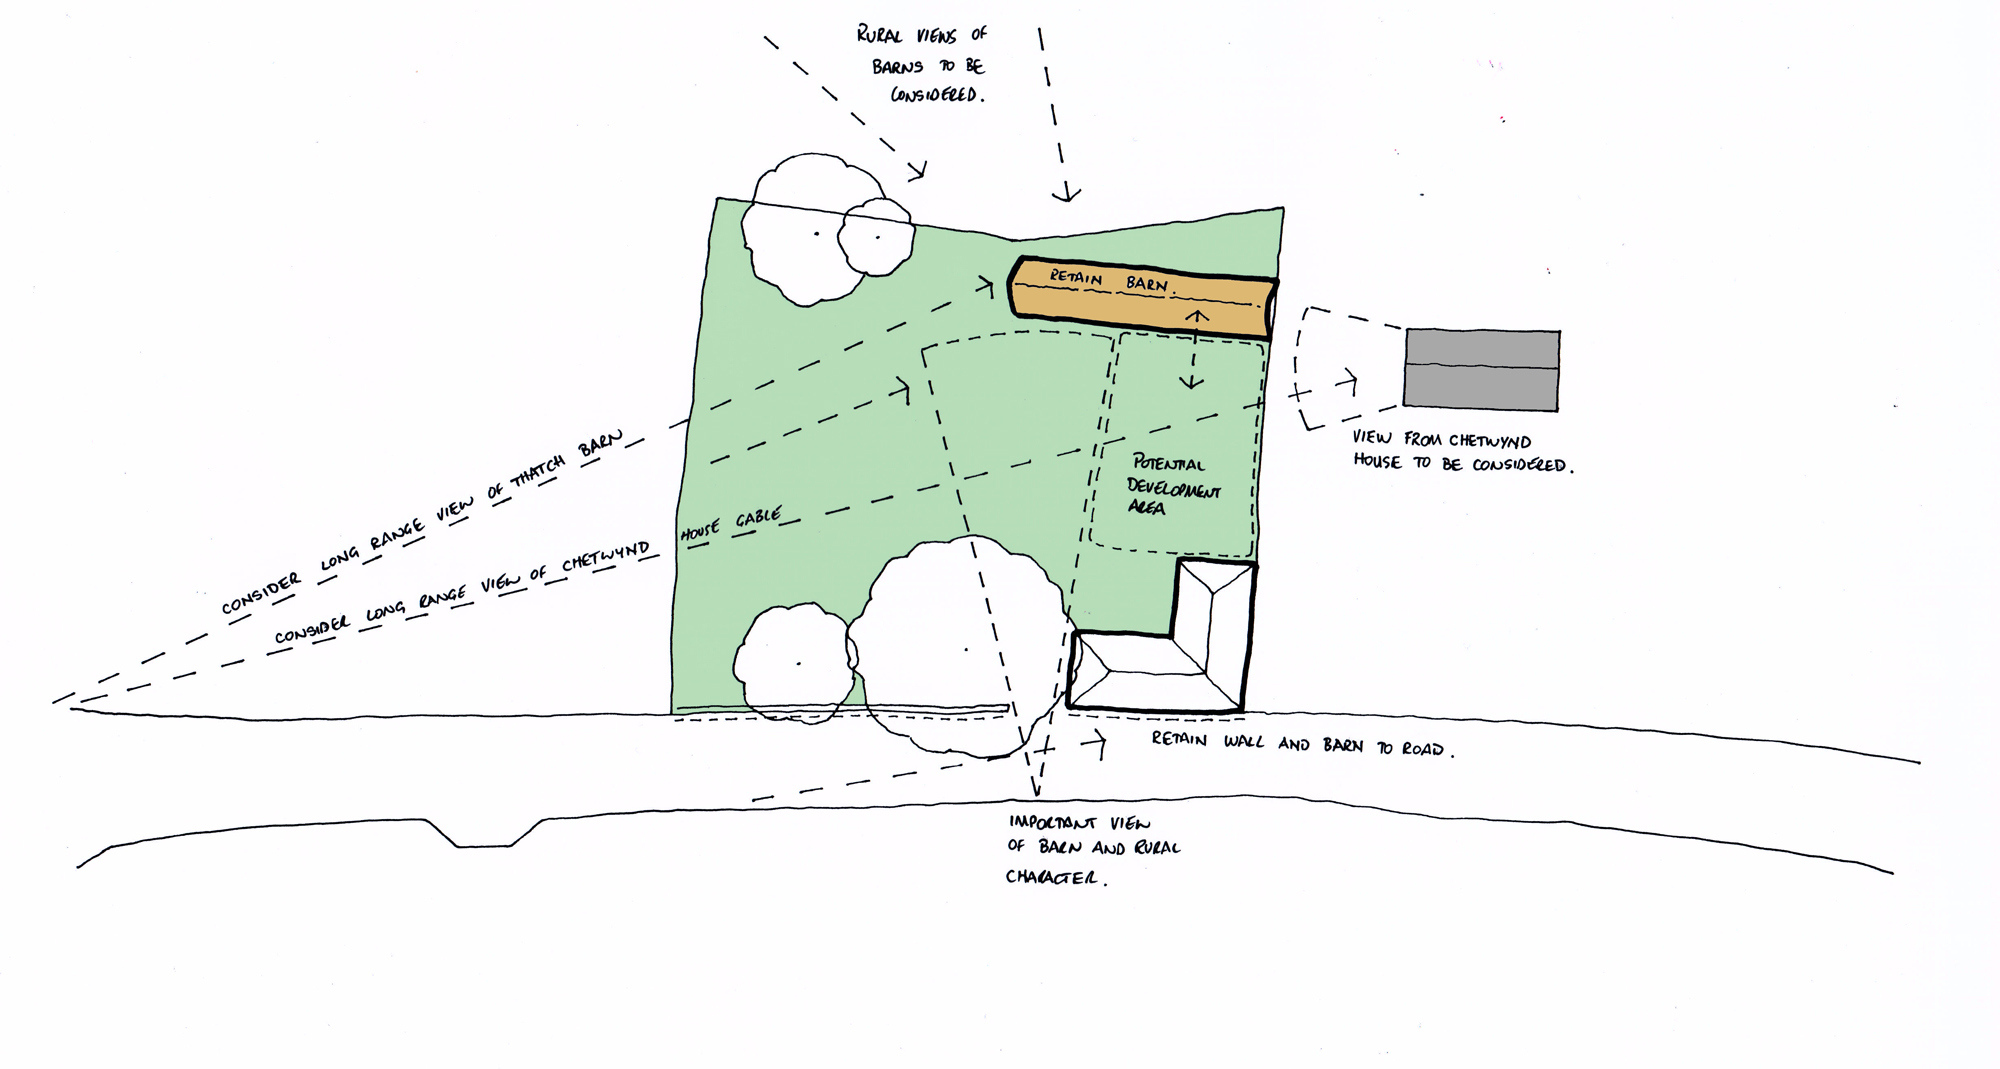 Handrawn diagram with lines depicting views of landscape | cdc studio cambridge architects